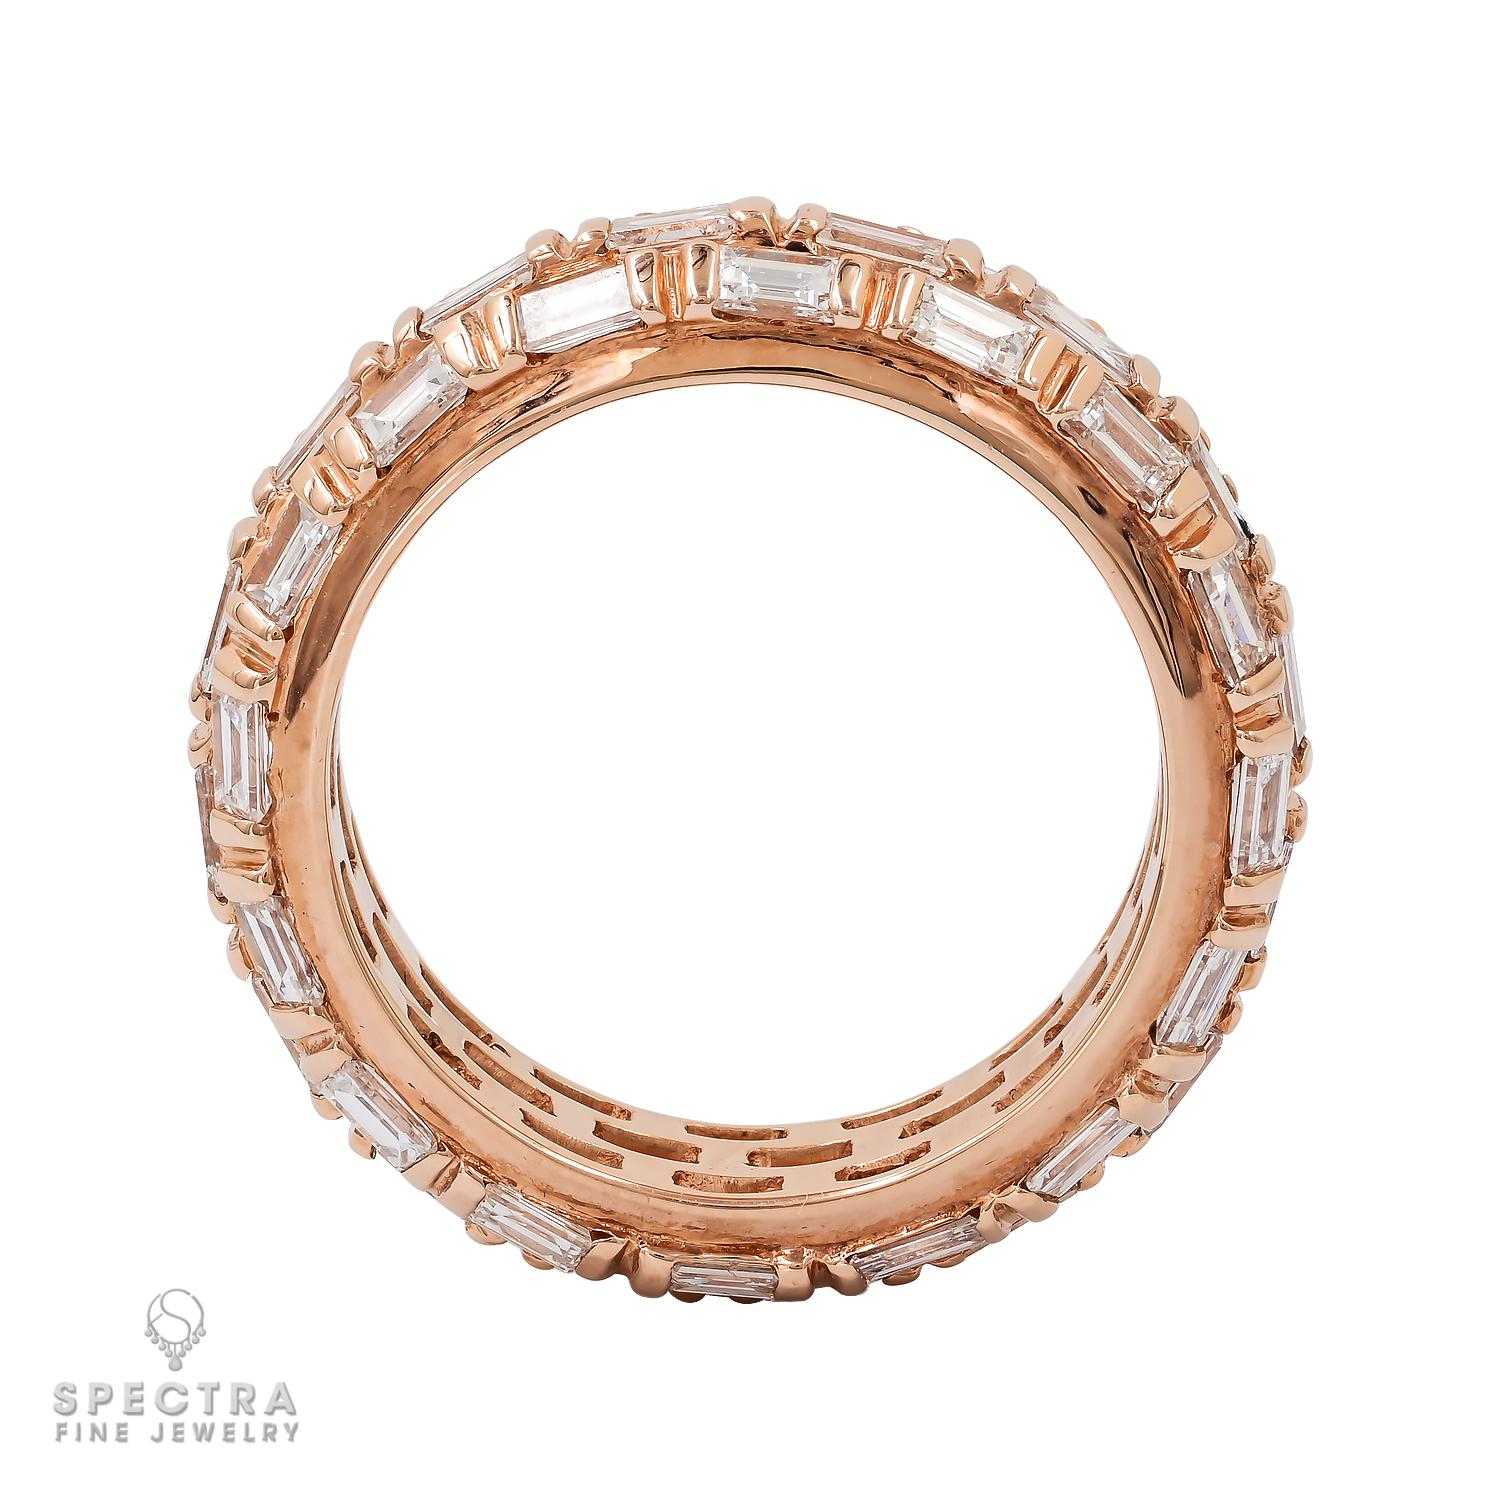 Contemporary Spectra Fine Jewelry Diamond Rose Gold Wedding Band For Sale